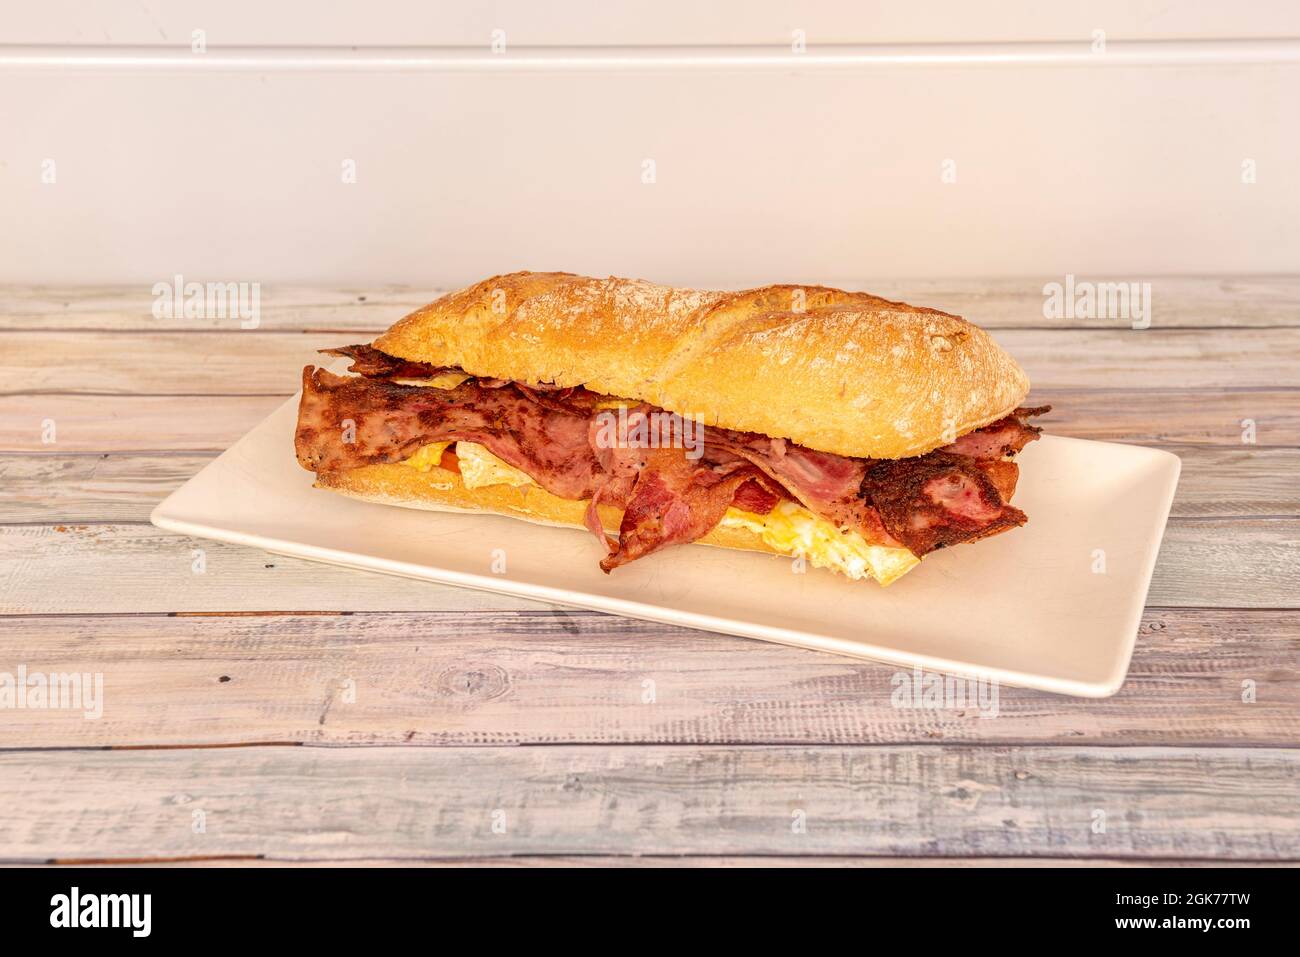 Great sandwich of French omelette and a lot of fried bacon inside a loaf of ciabatta bread in the purest Spanish style Stock Photo